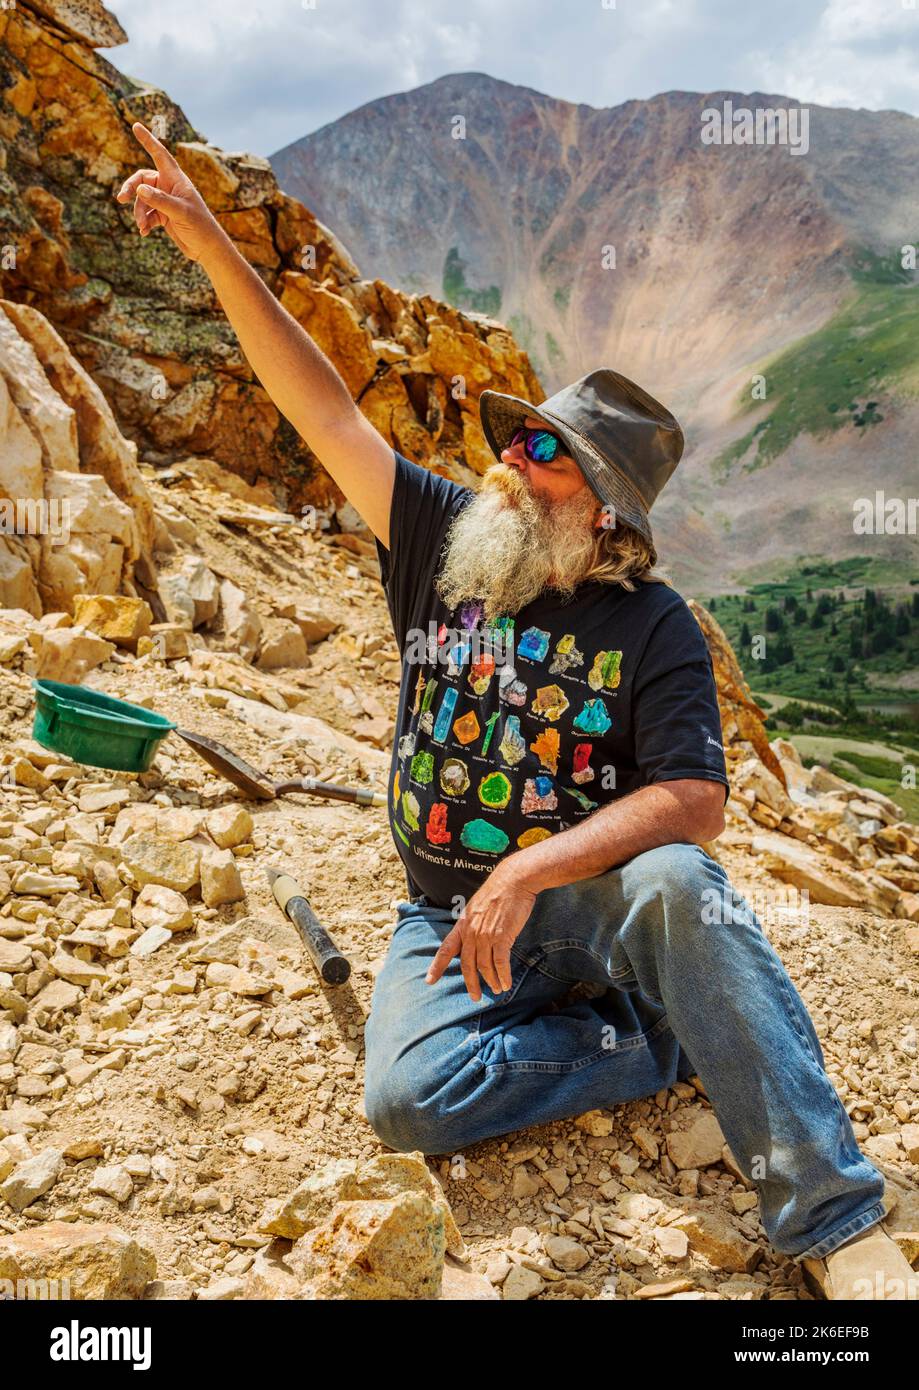 Brian Busse; American Gemtracker; famous gemstone miner; owner of famous “Thank You Lord” Aquamarine claim; Mt. Antero; Colorado; USA Stock Photo